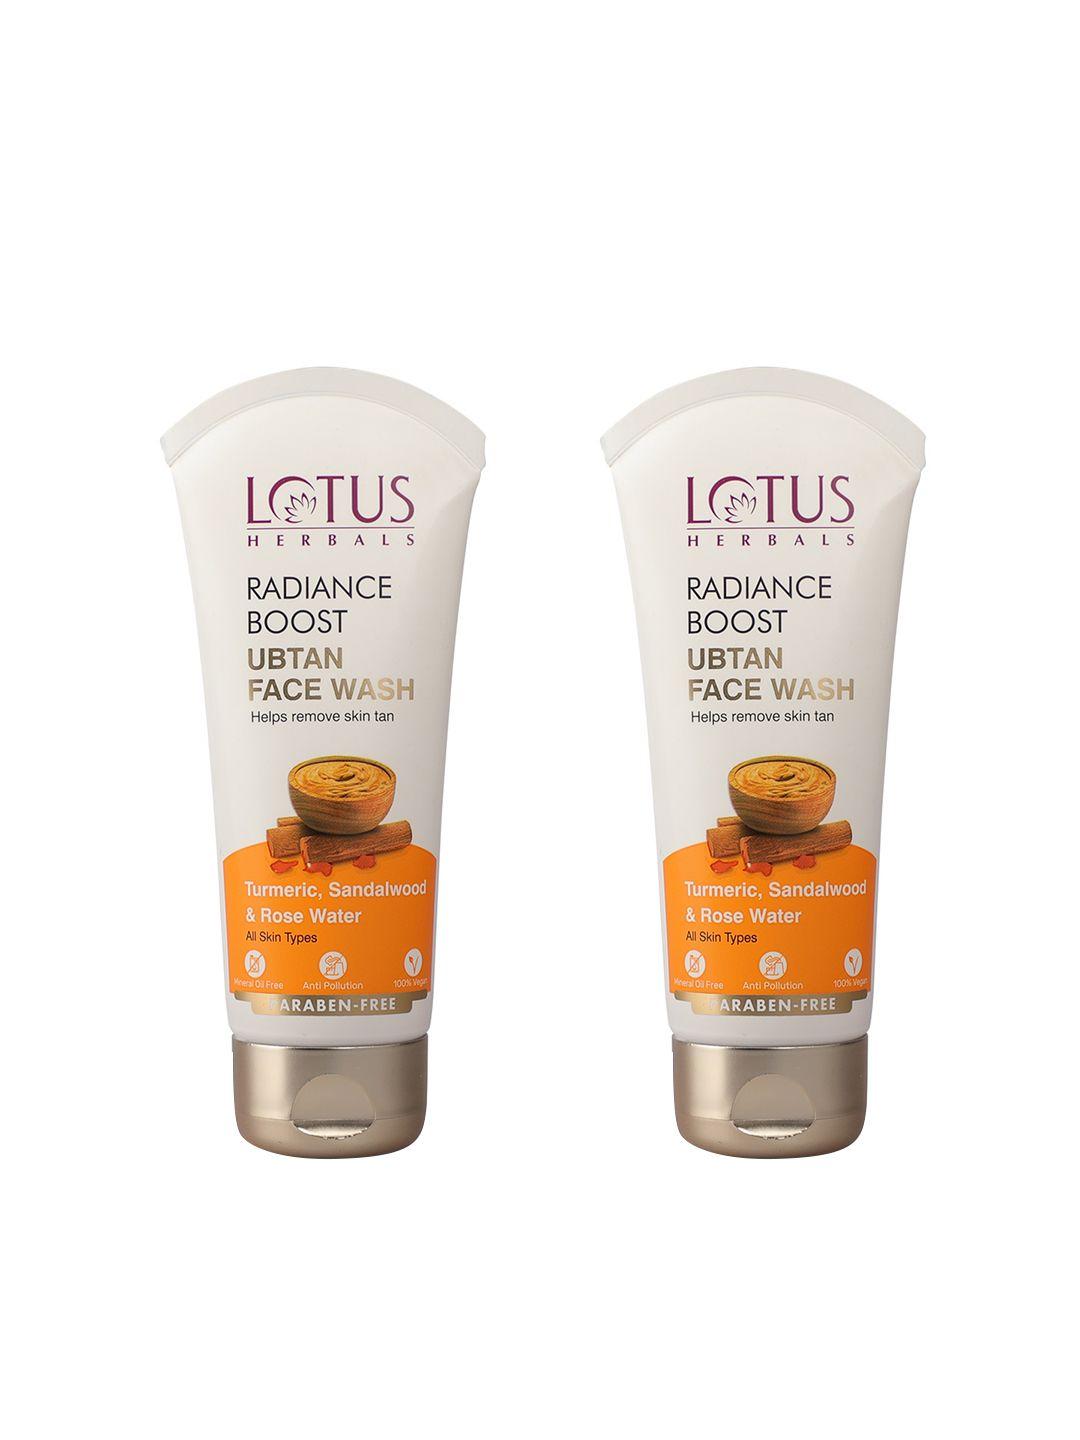 lotus herbals set of 2 radiance boost ubtan face wash with turmeric - 100g each